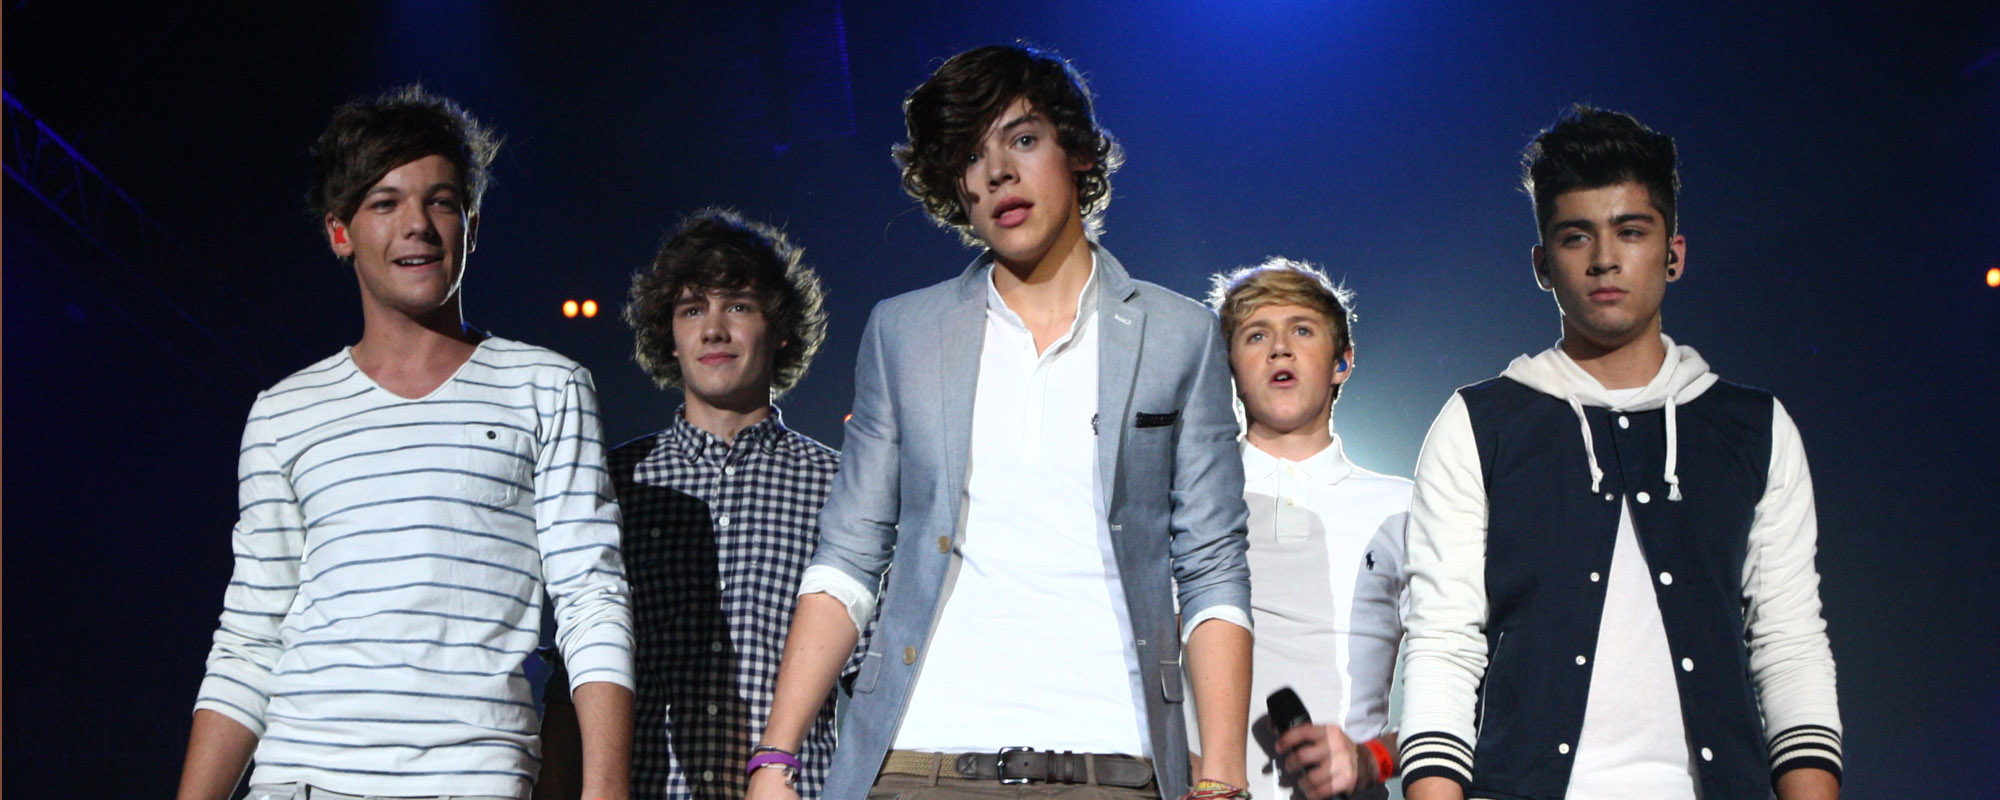 One Direction Covers Kelly Clarkson in Unseen ‘X Factor’ Footage